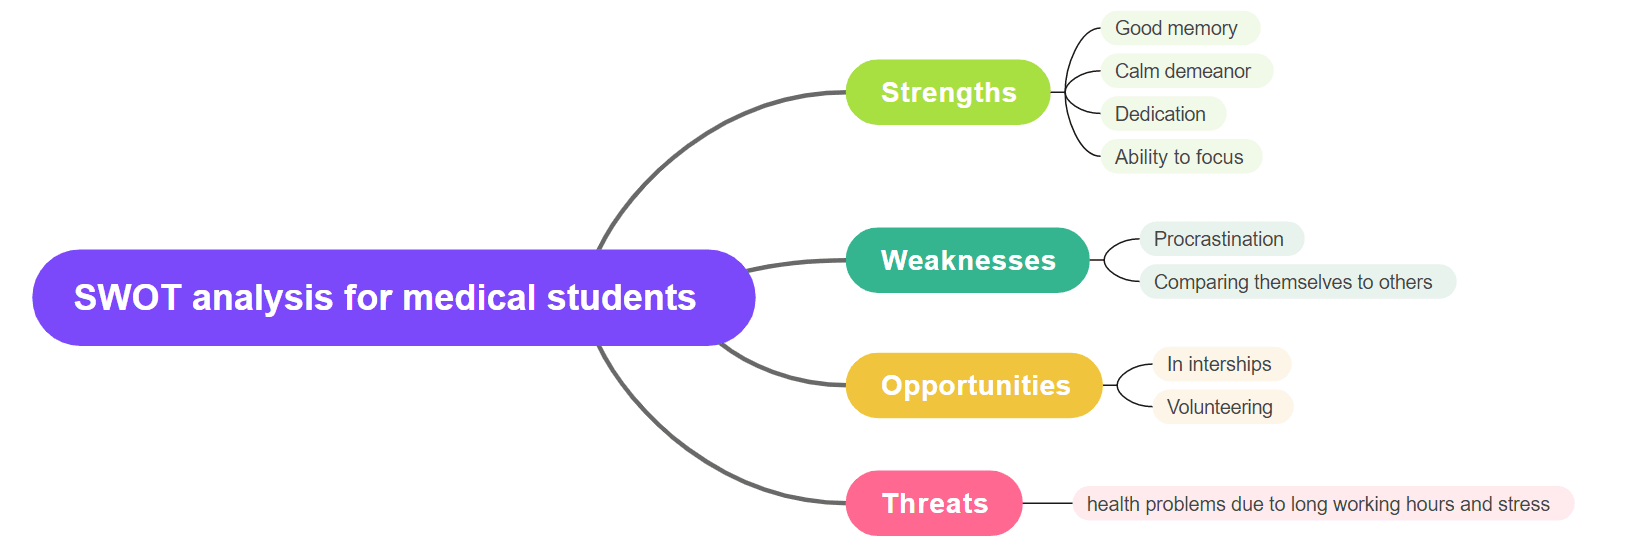 SWOT analysis for medical student